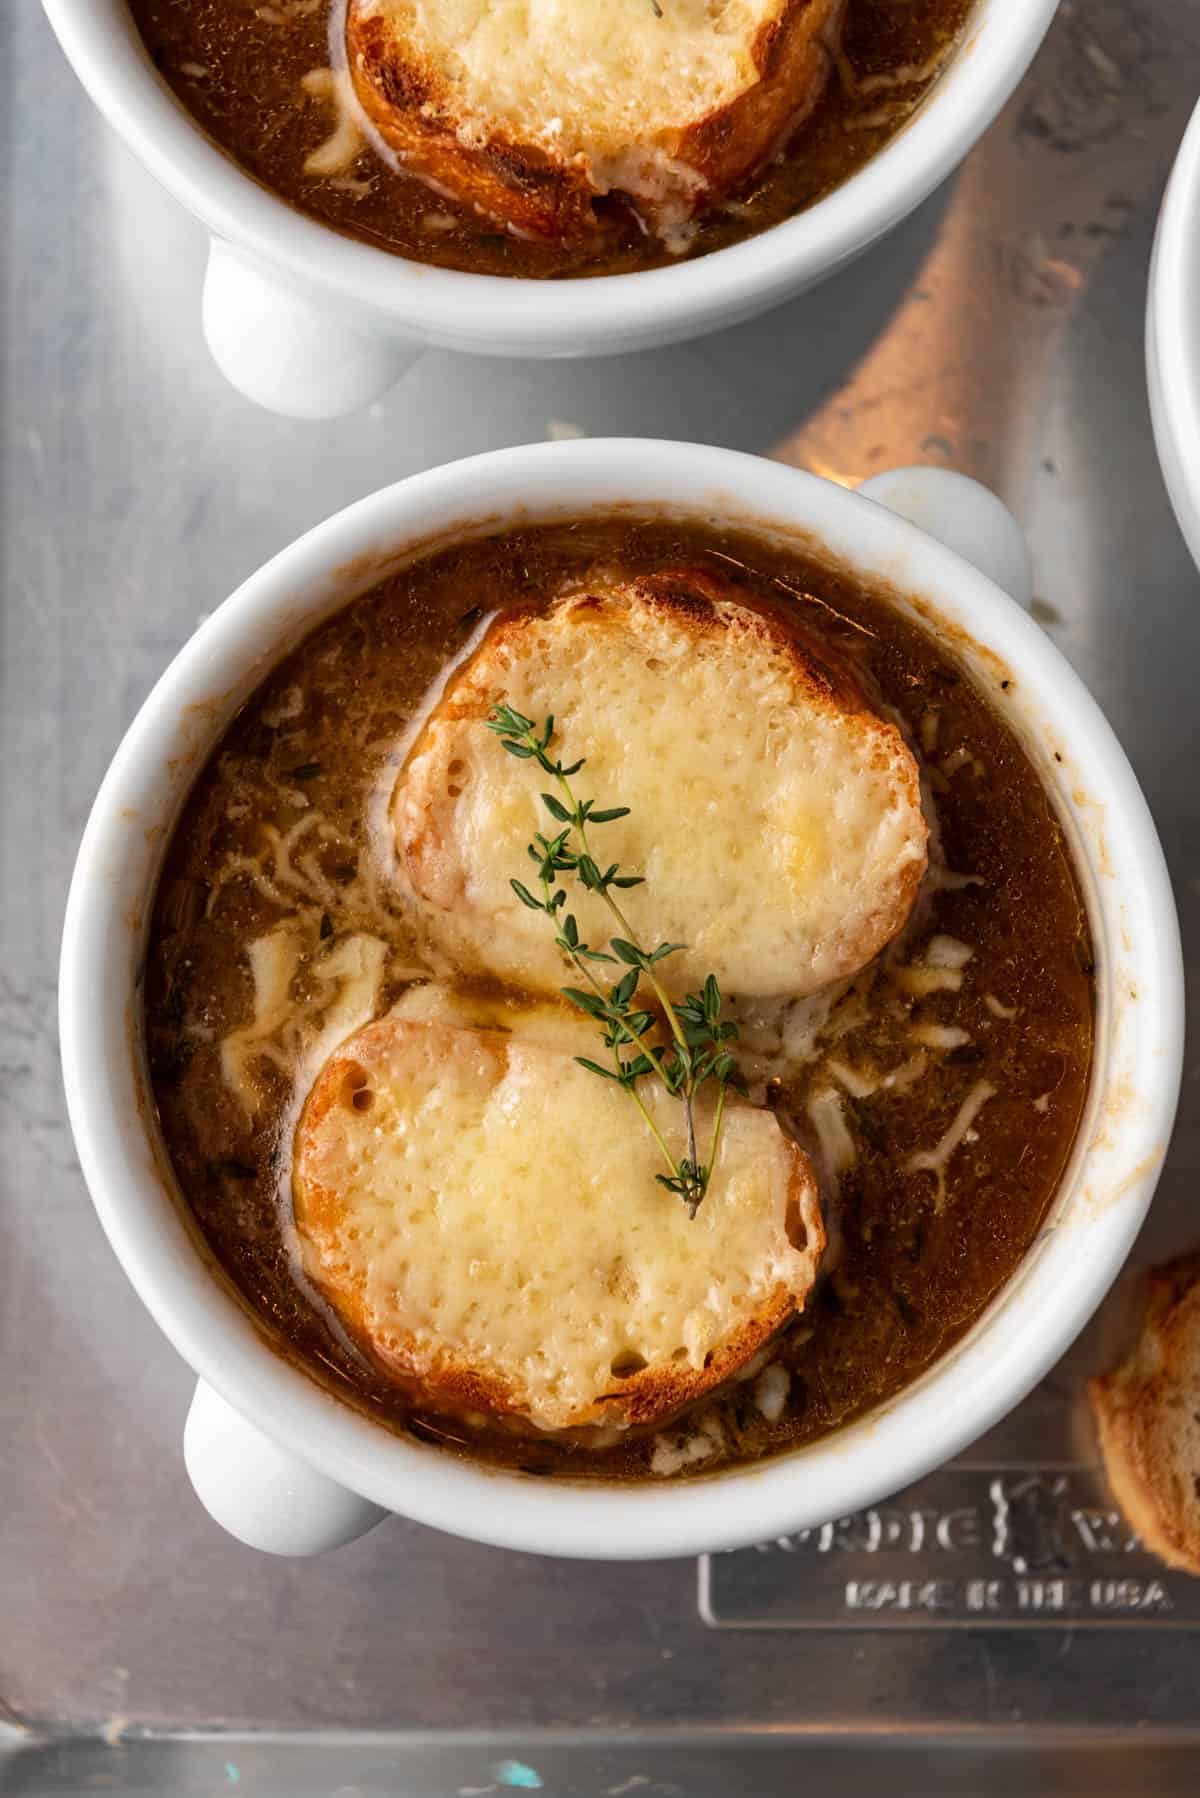 A bowl of French onion soup with baguette slices and melted gruyere cheese on top.